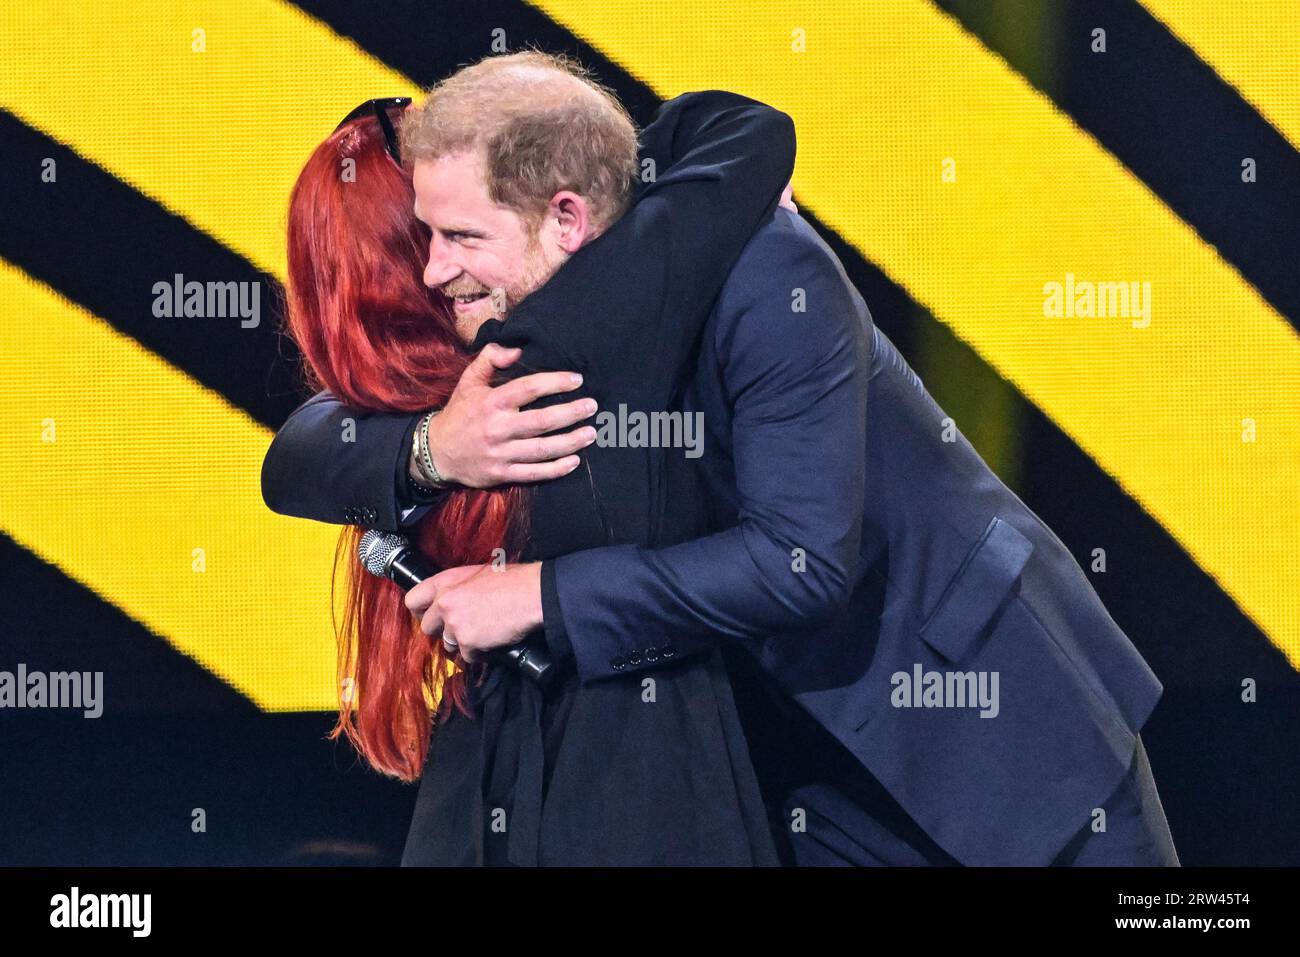 Düsseldorf, Germany. 16th Sep, 2023. Prince Harry, the Duke of Sussex, hugs a Ukrainian daughter of a female soldier, then kspeaks at the ceremony. The Invictus Games Düsseldorf conclude with a closing ceremony at Merkur Spiel Arena. 21 nations participated in the games this year. Athletes parade around the arena and participate, and there are performances from singers Sam Ryder and Rita Ora, as well as speeches from Prince Harry, German President Steinmeyer and other dignitaries. Credit: Imageplotter/Alamy Live News Stock Photo